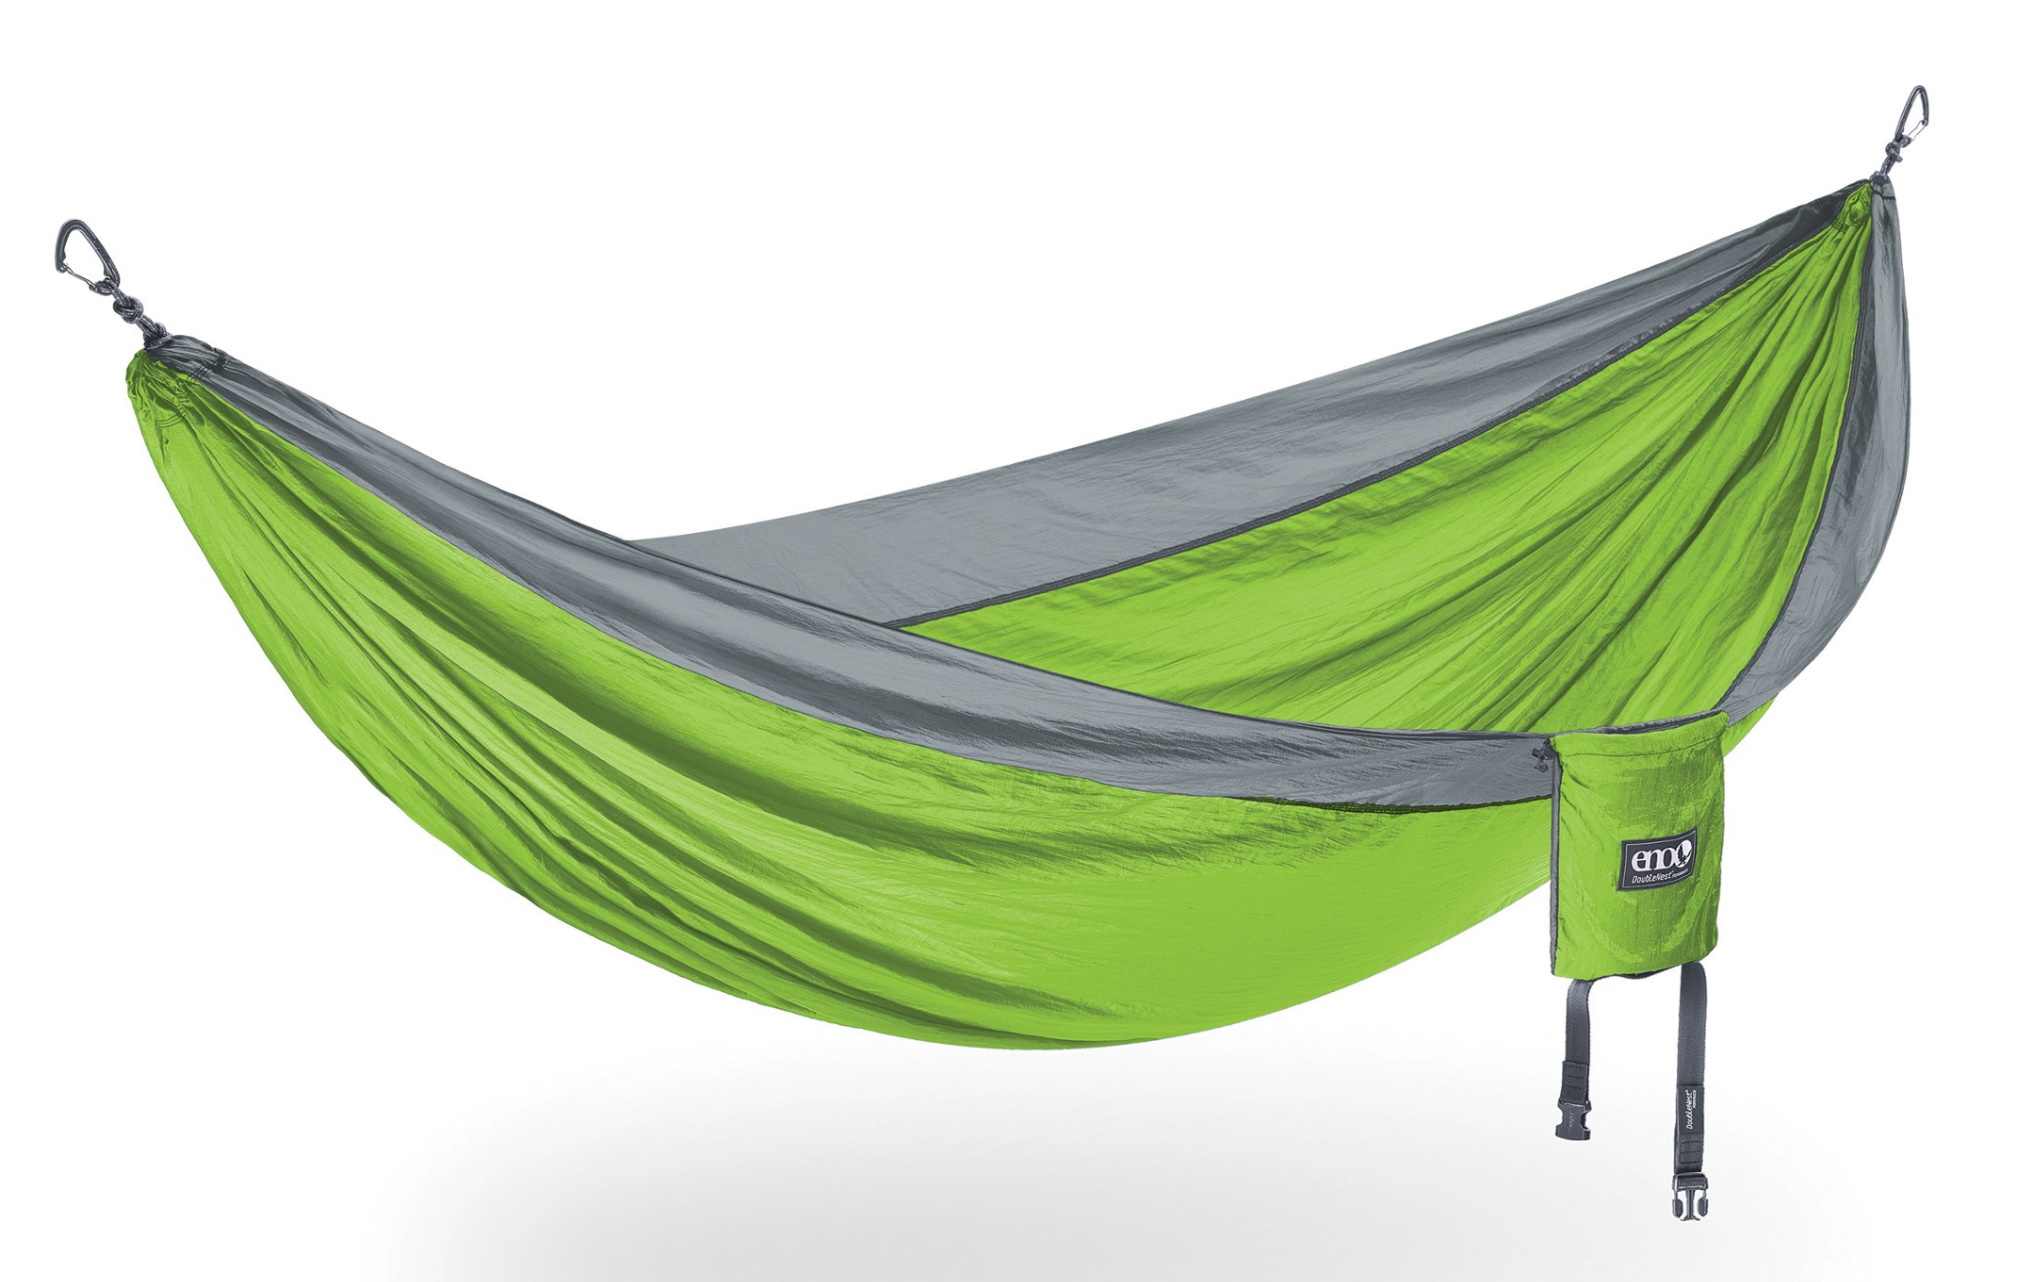 Hang Out With Room for 2: ENO DoubleNest Hammock Review